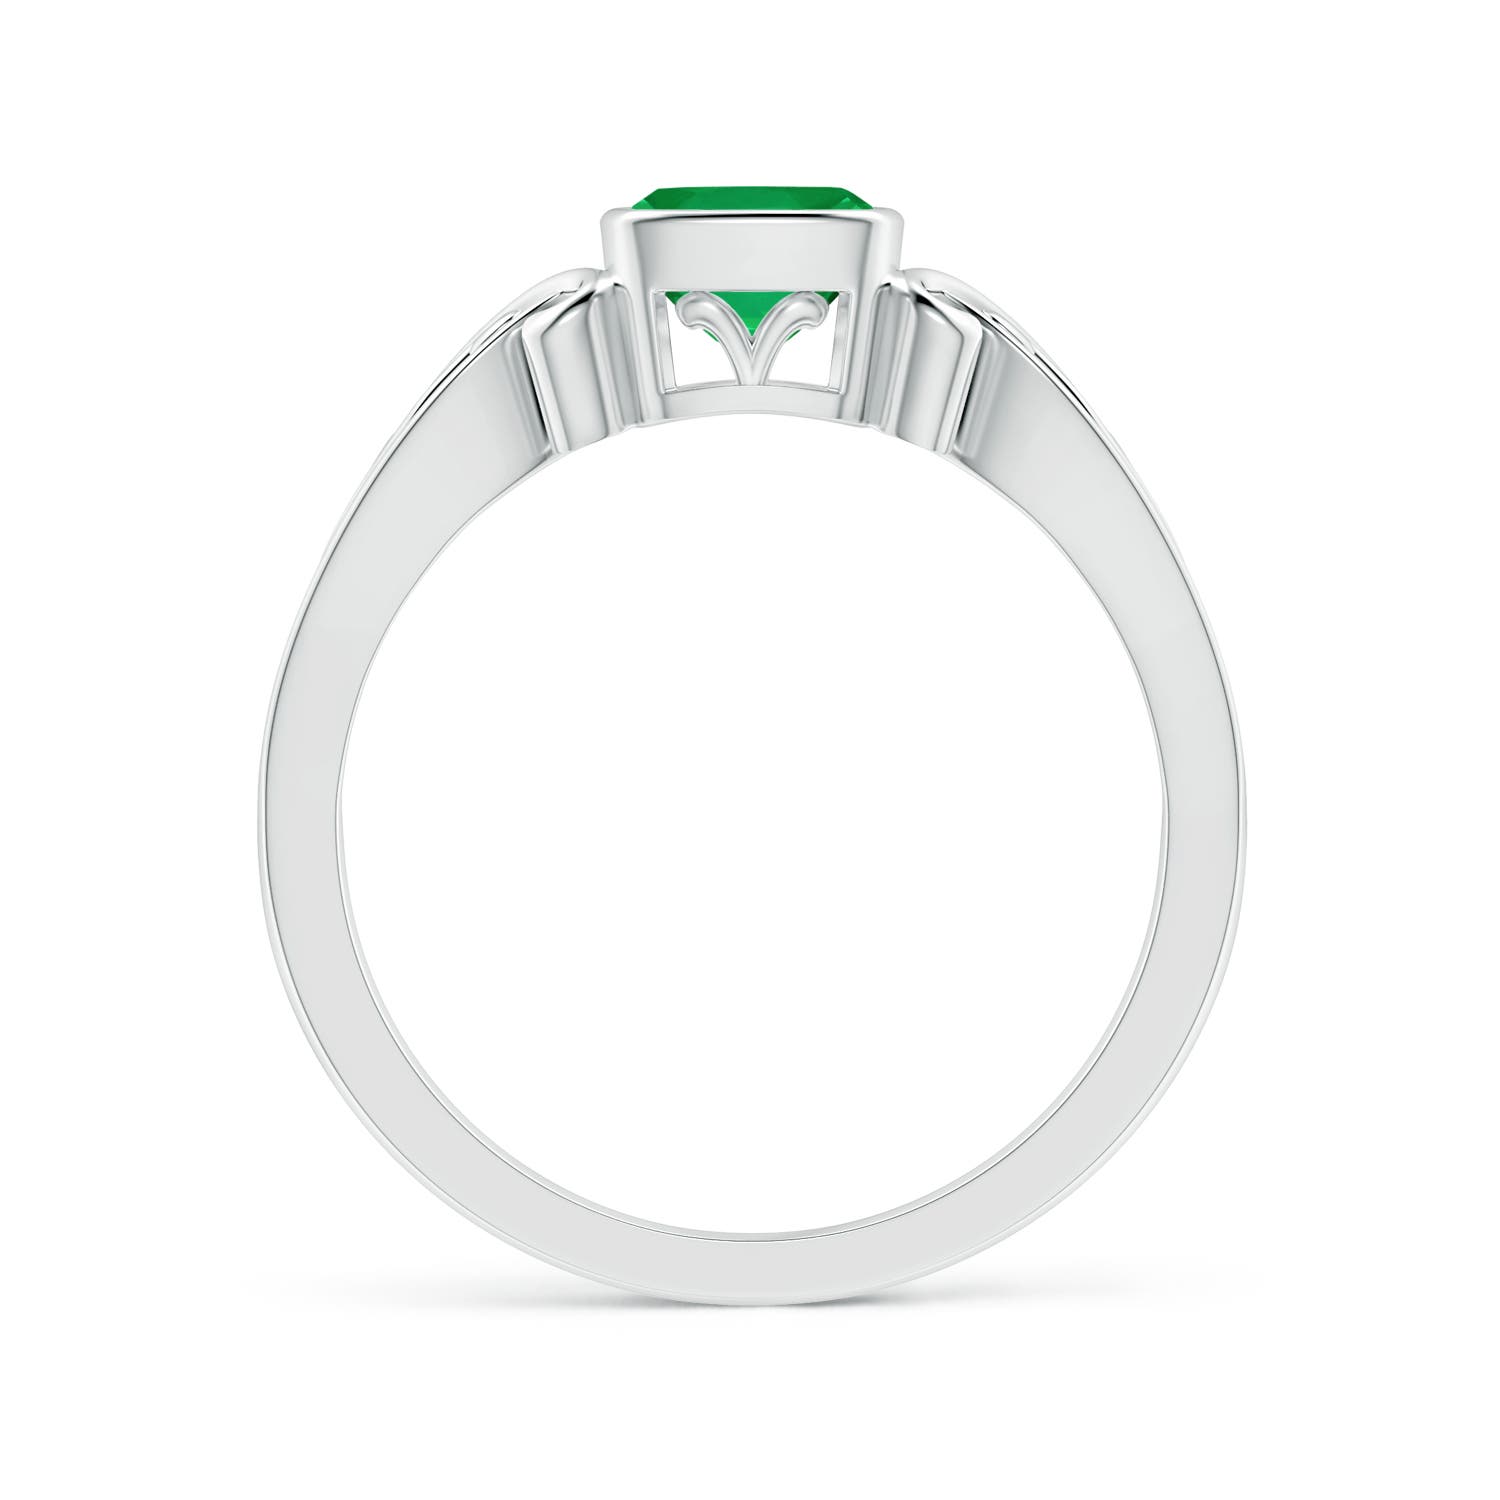 AA - Emerald / 0.55 CT / 14 KT White Gold